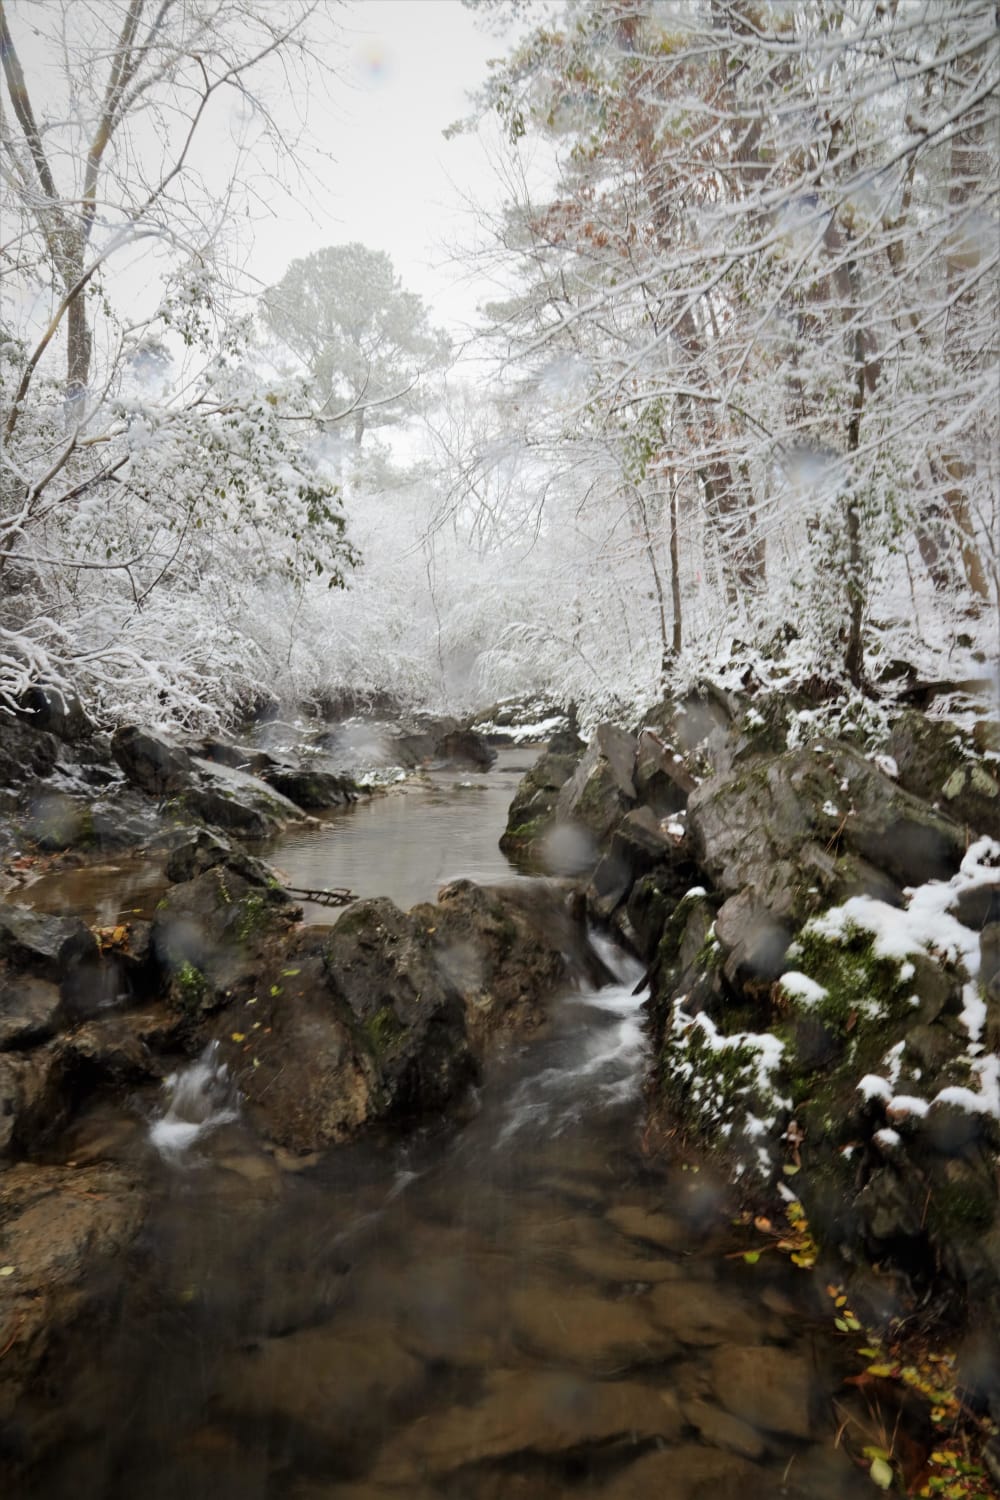 Went hiking in The Ouachita National Forest last year the day before a very unusual and big snow storm hit Arkansas, USA. I just posted the video of that hike on you tube, and what do we get? Another unusual snowstorm! Coincidence? At least, hiking in it is pretty!